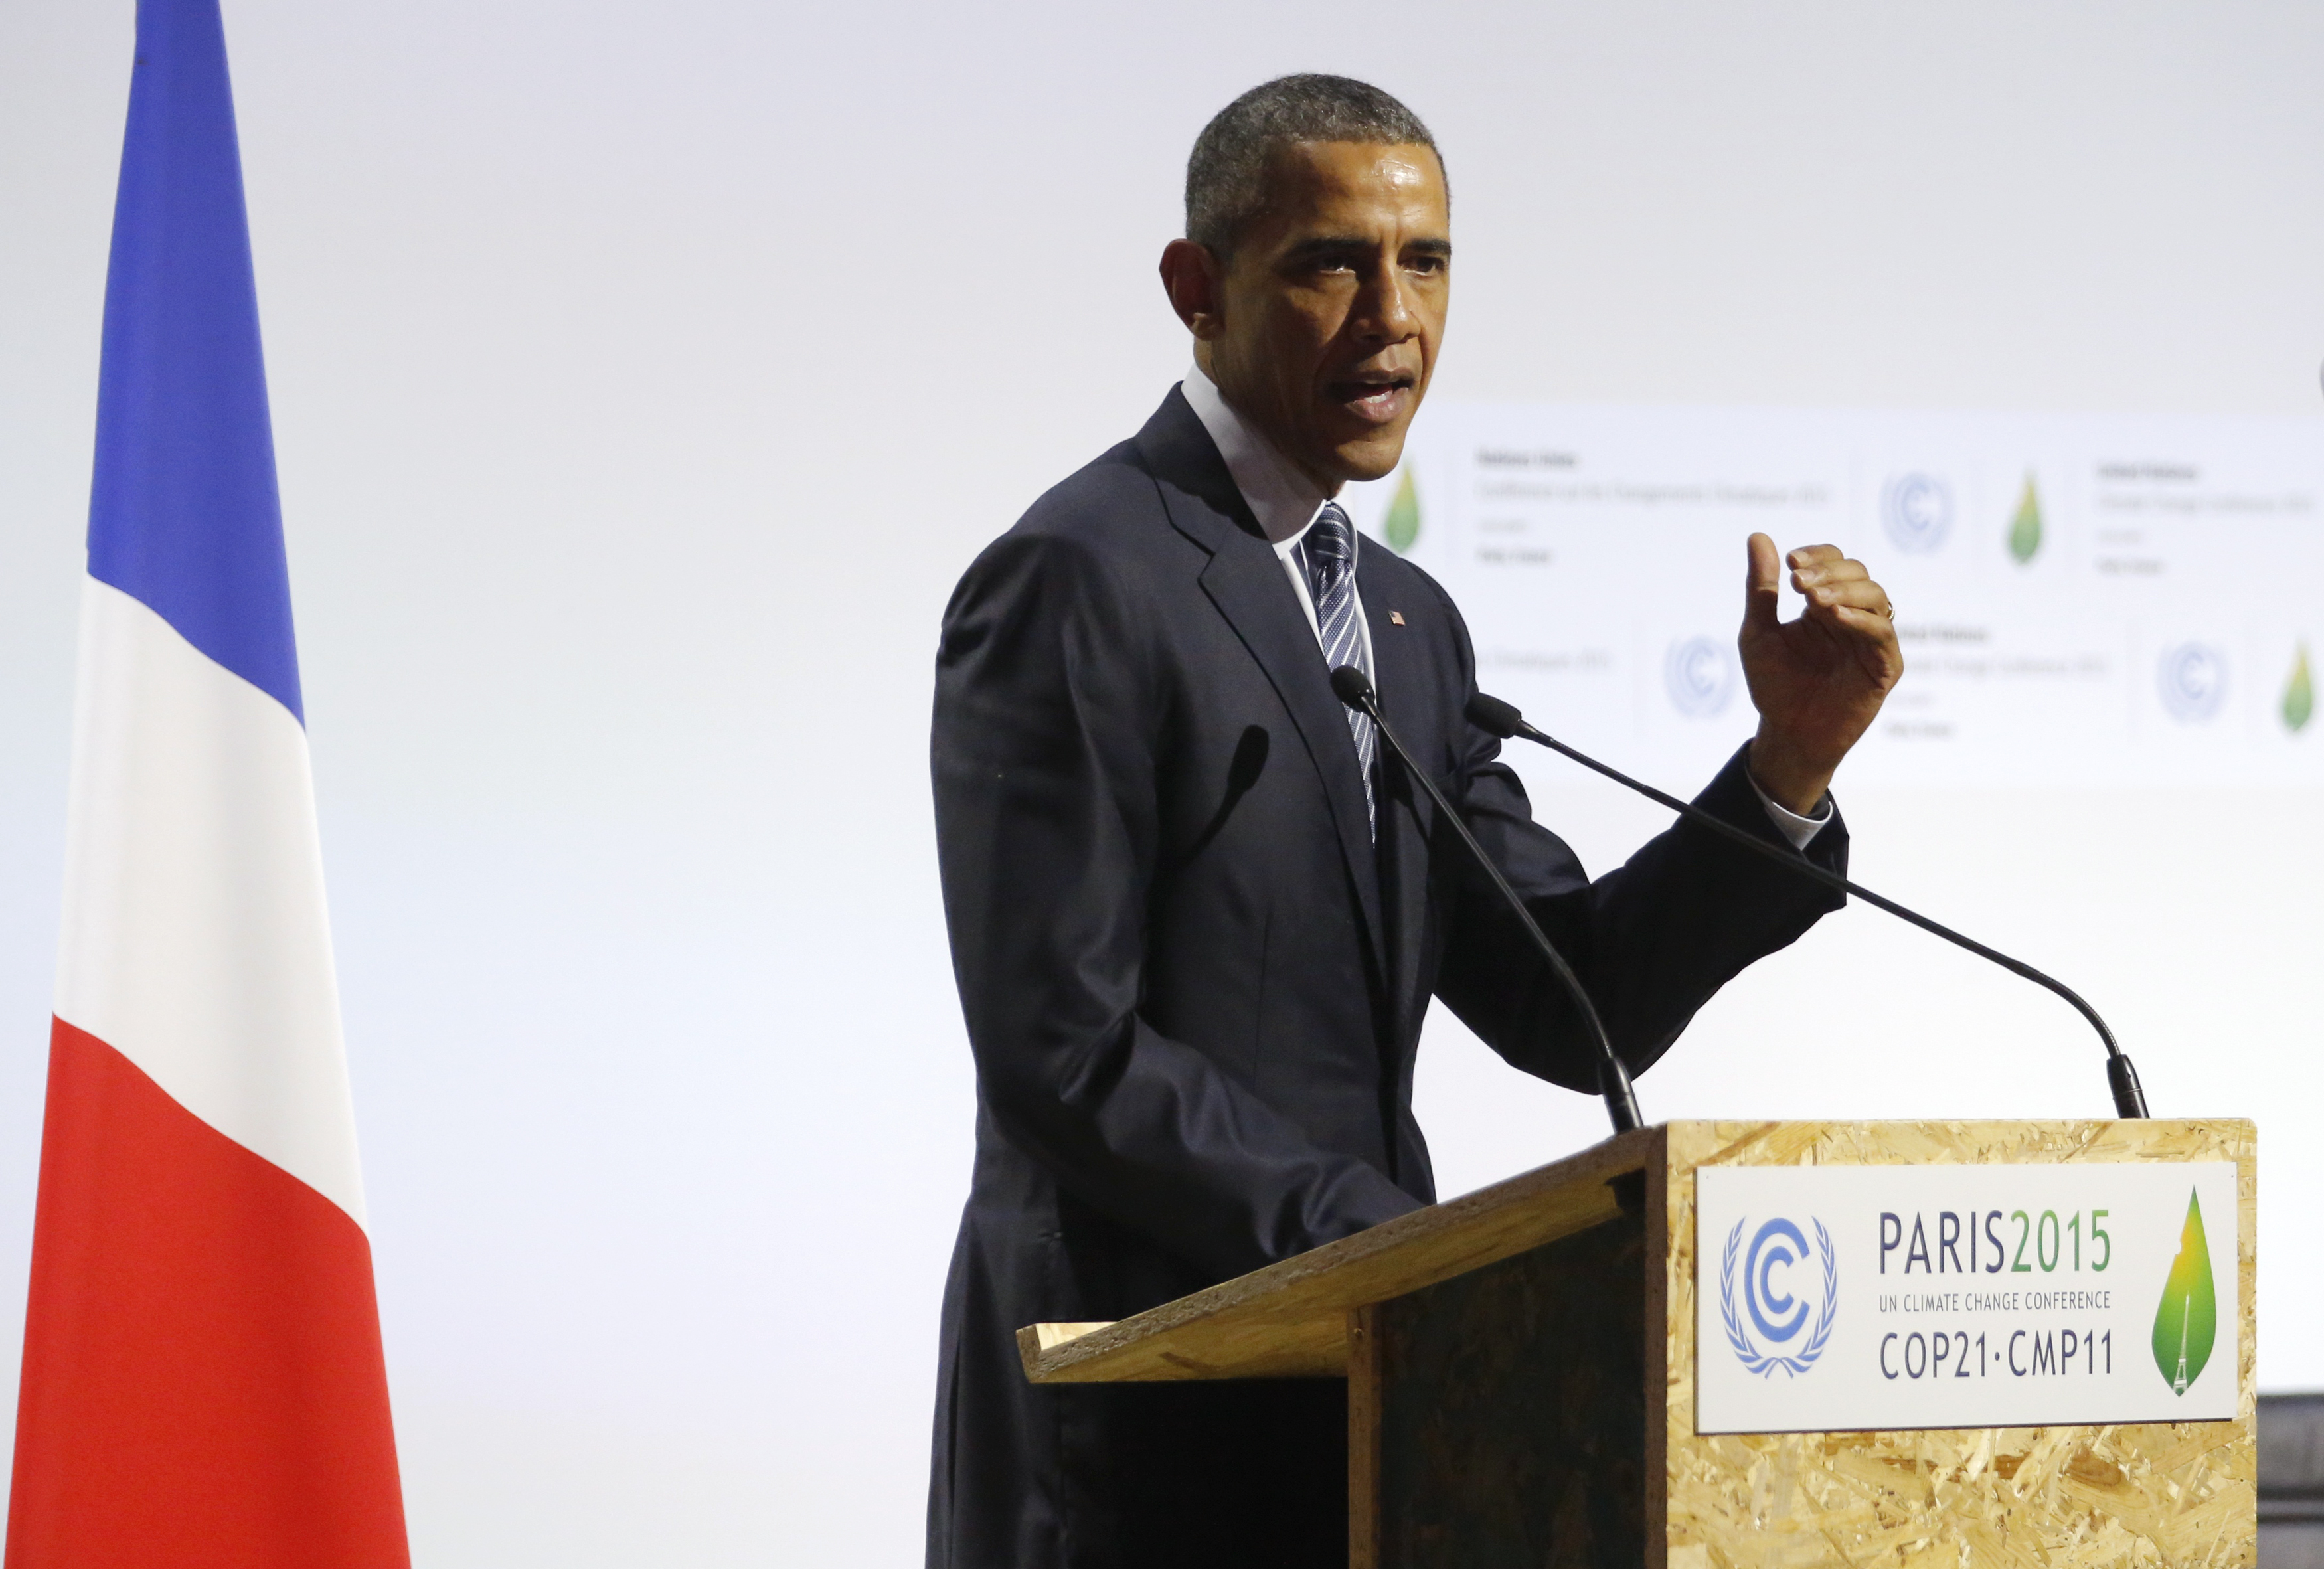 US President Barack Obama delivers a speech on the opening day of the World Climate Change Conference 2015 in Le Bourget